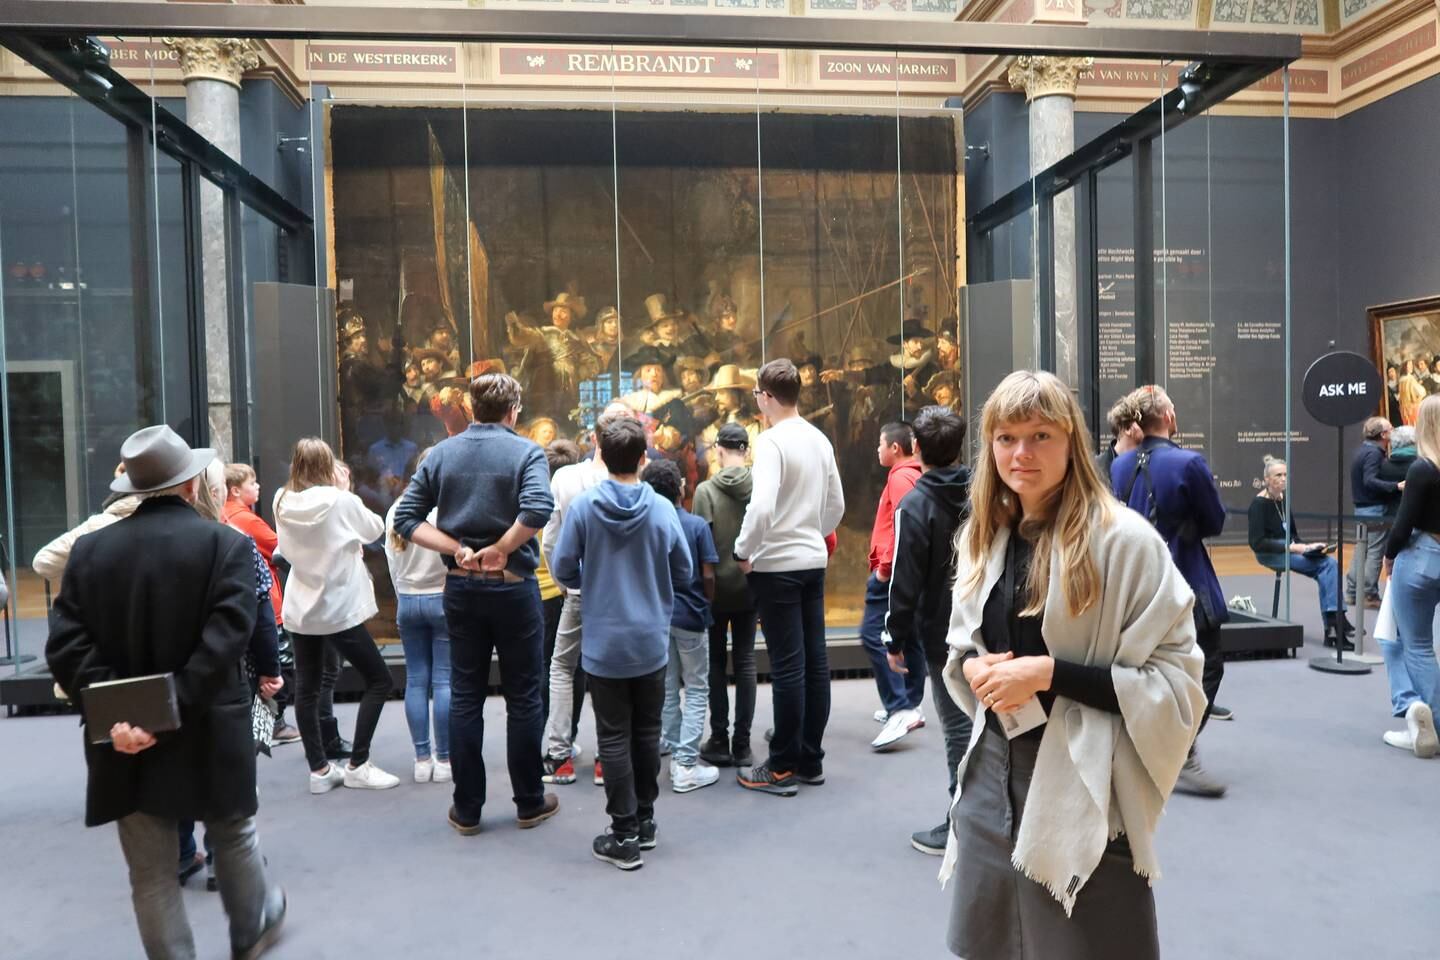 Dutch artist and art historian Lisa Wiersma stands in front of Rembrandt's 'The Night Watch' at the Rijksmuseum. Photo: Sarah Hassan